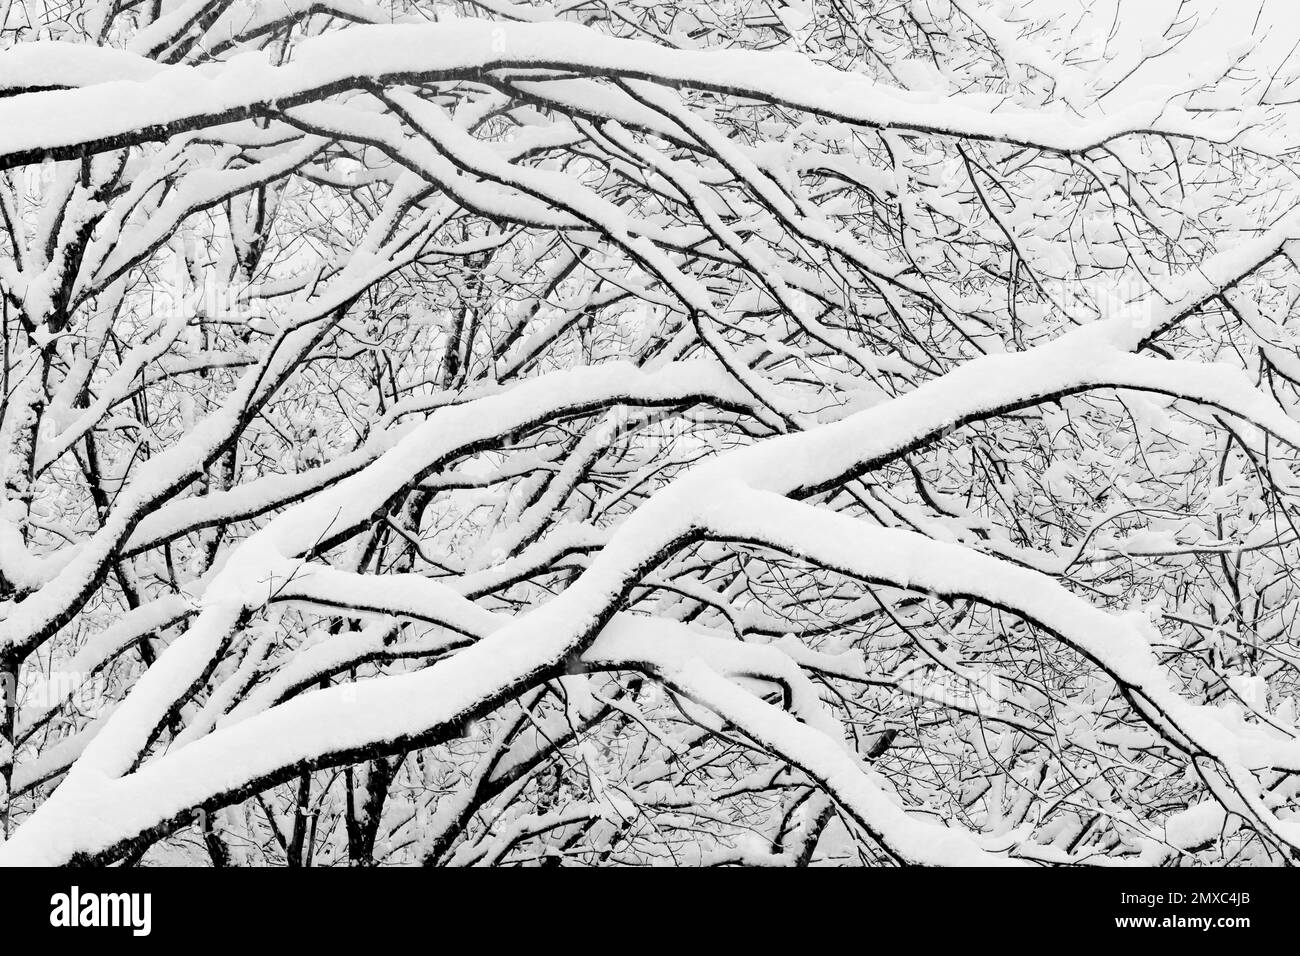 Snowy Landscape, pattern of branches covered in snow, Campania, Italy Stock Photo